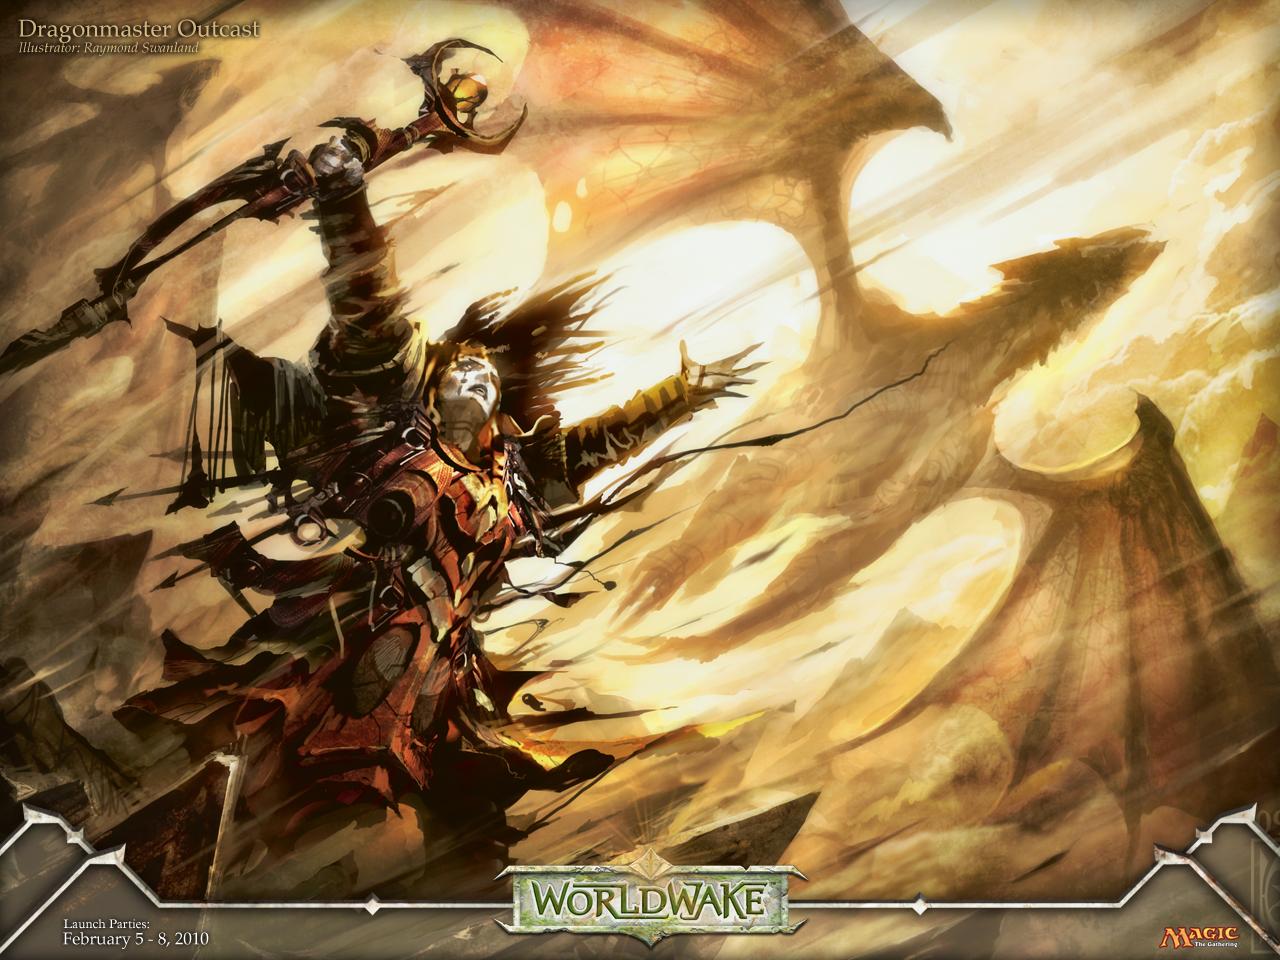 Free download Wallpaper of the Week Dragonmaster Outcast Daily MTG